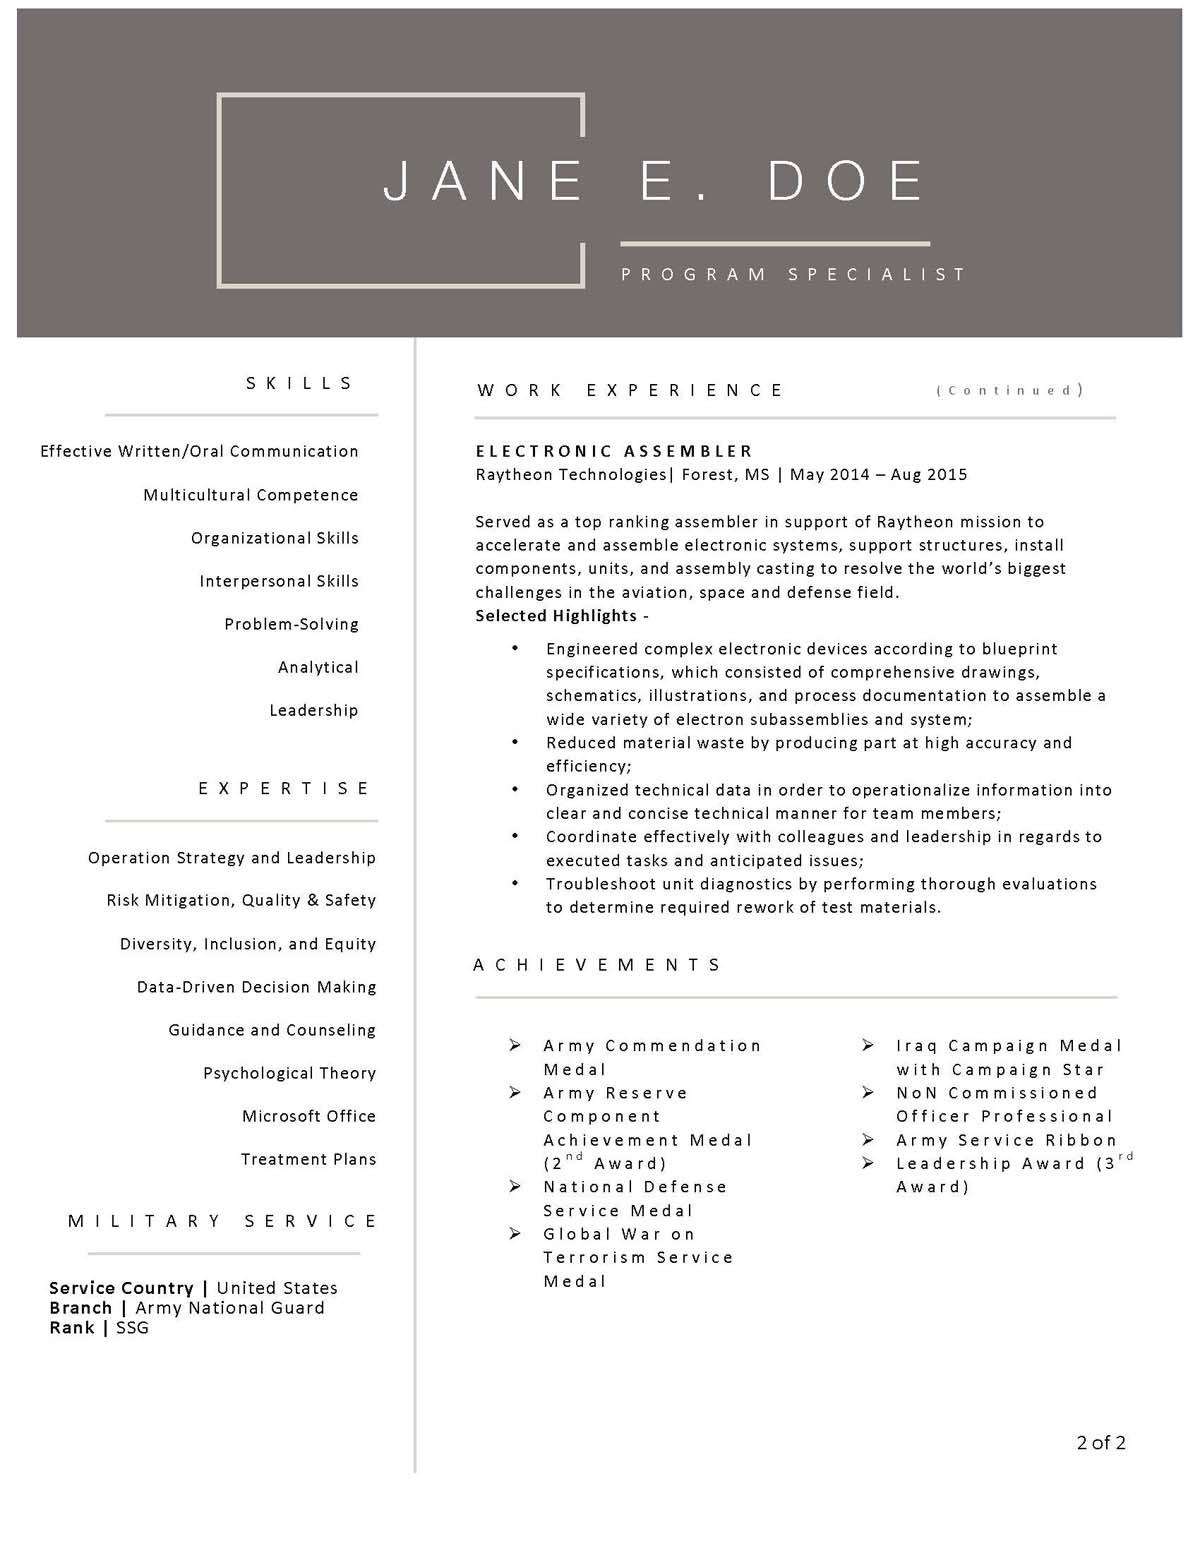 Sample resume: Military Services, Mid Experience, Chronological